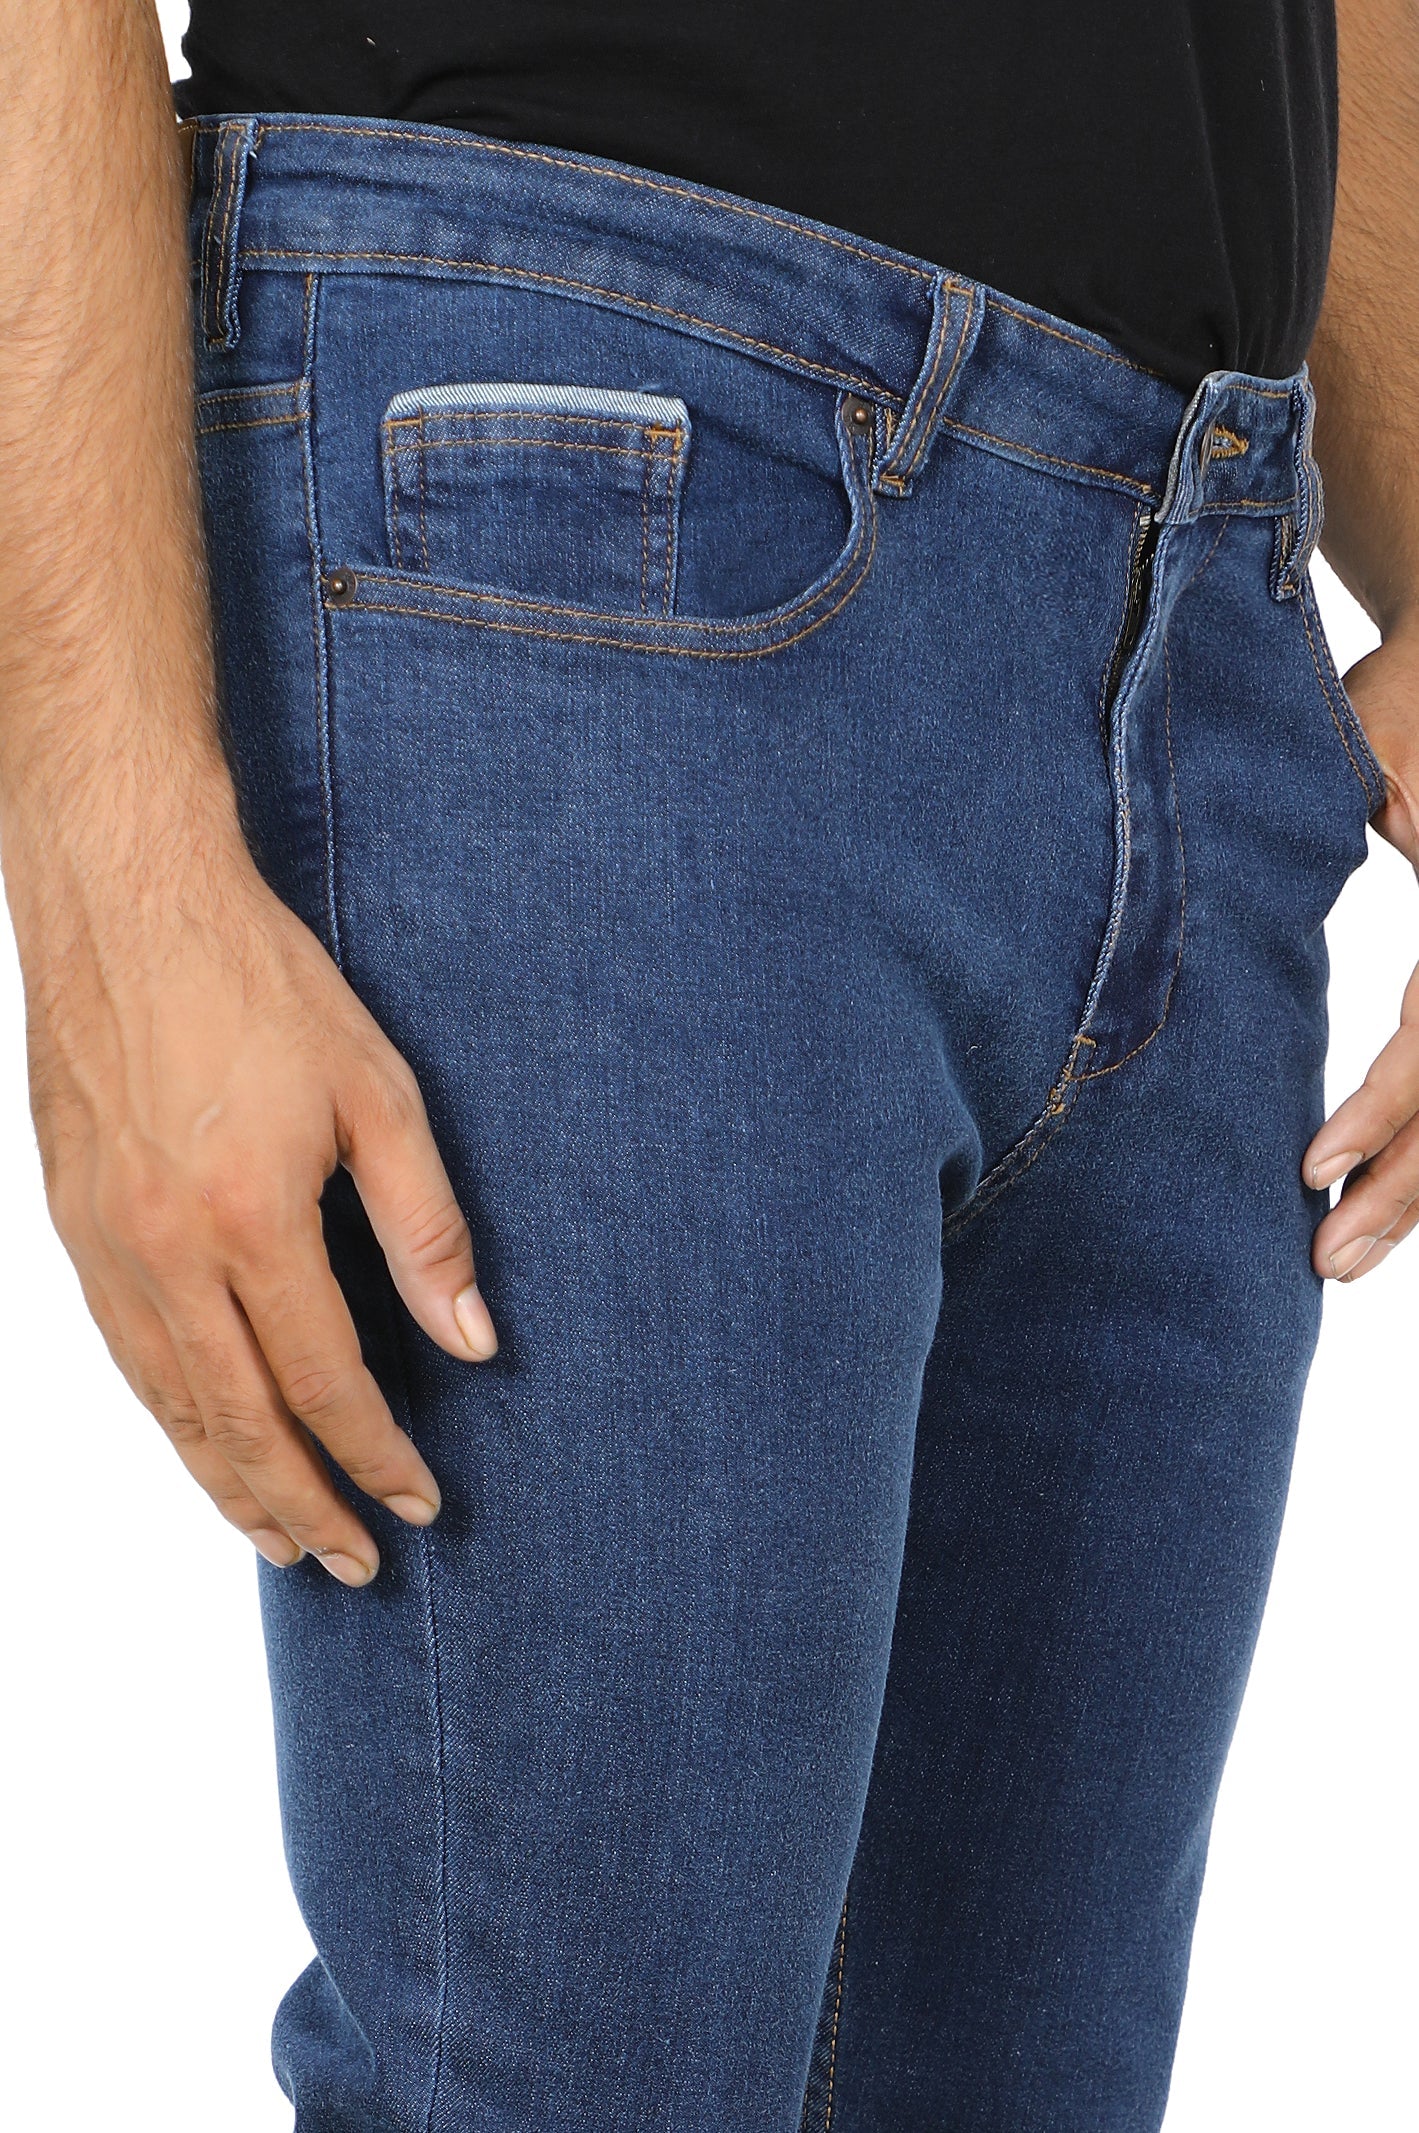 Casual Jeans for Men's - Diners